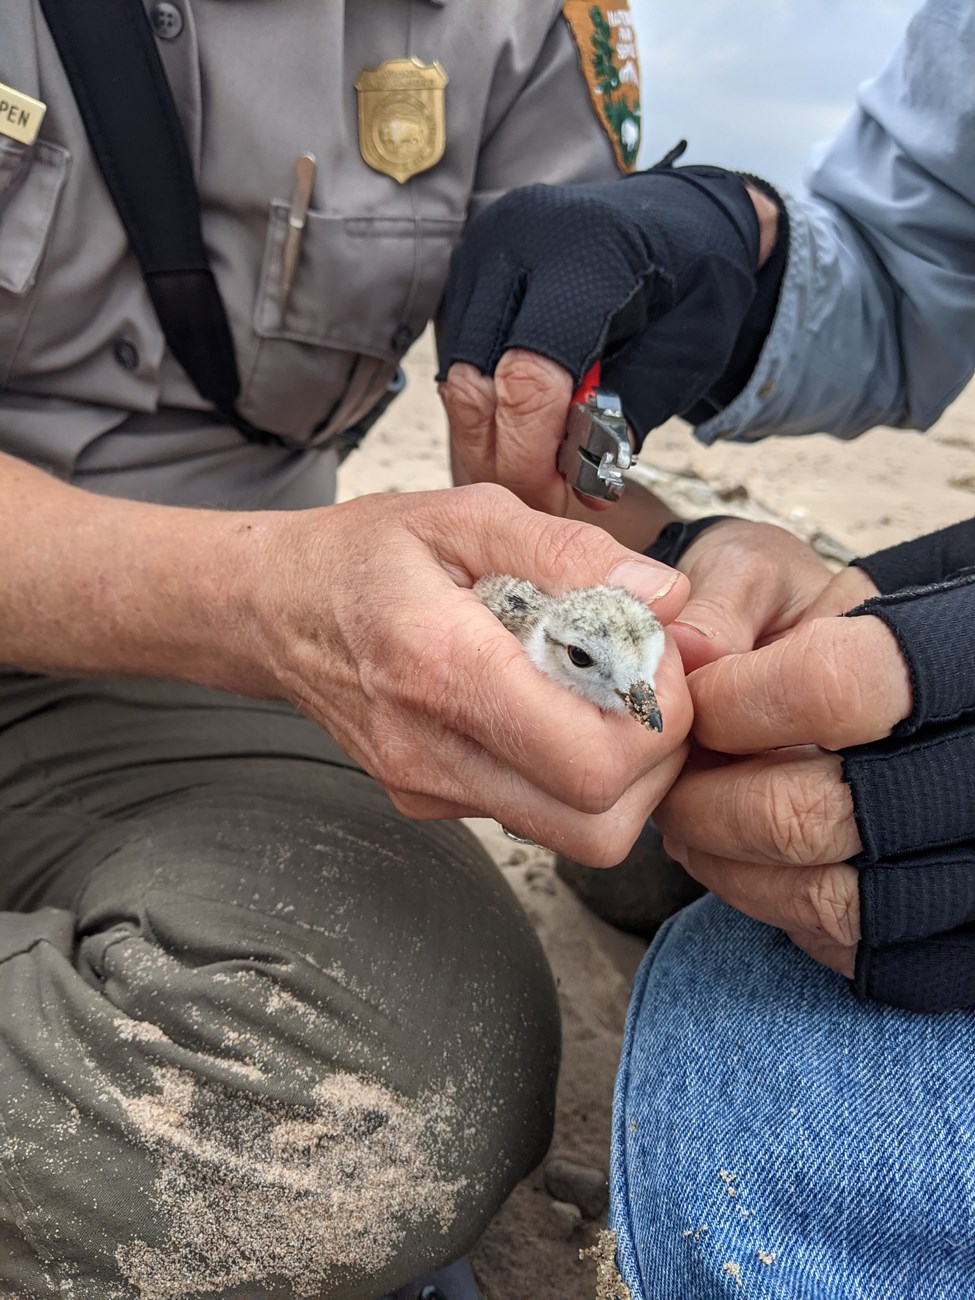 One NPS staff member holding a small white piping plover chick and another pair of hands placing a small band around the birds ankle.